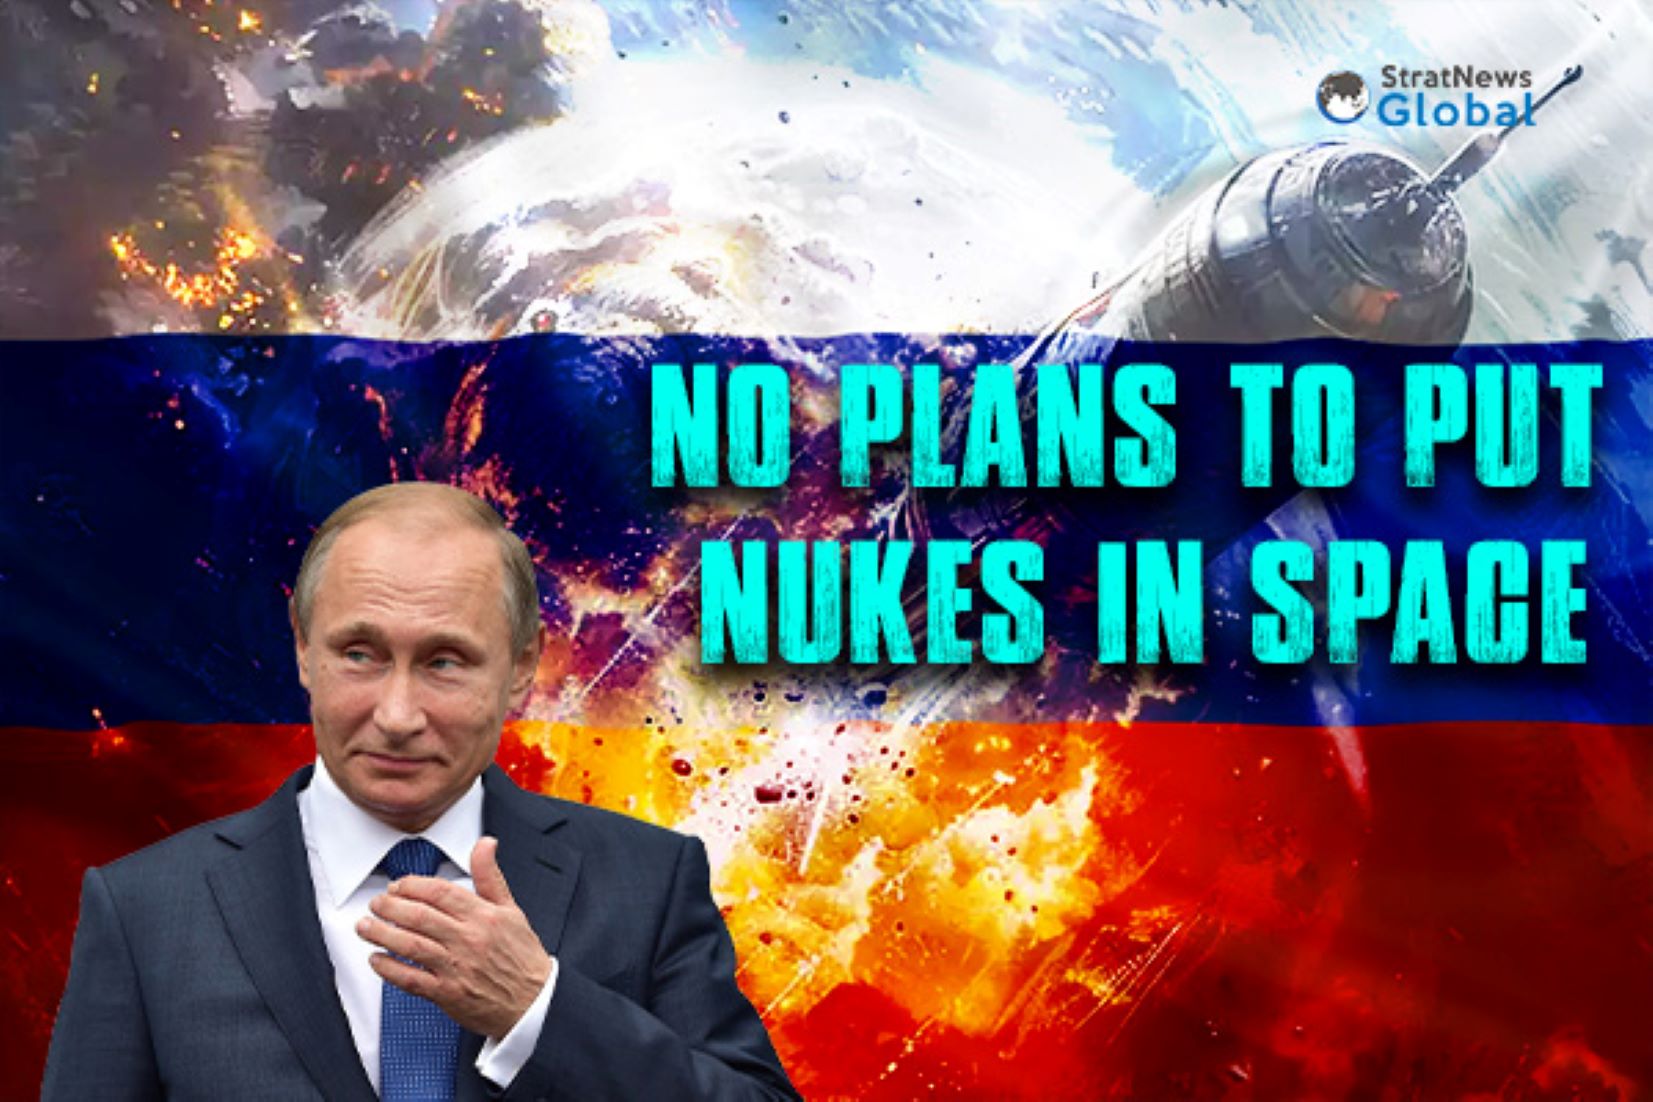 Russia Has No Plan To Station Nuclear Weapons In Space: Putin